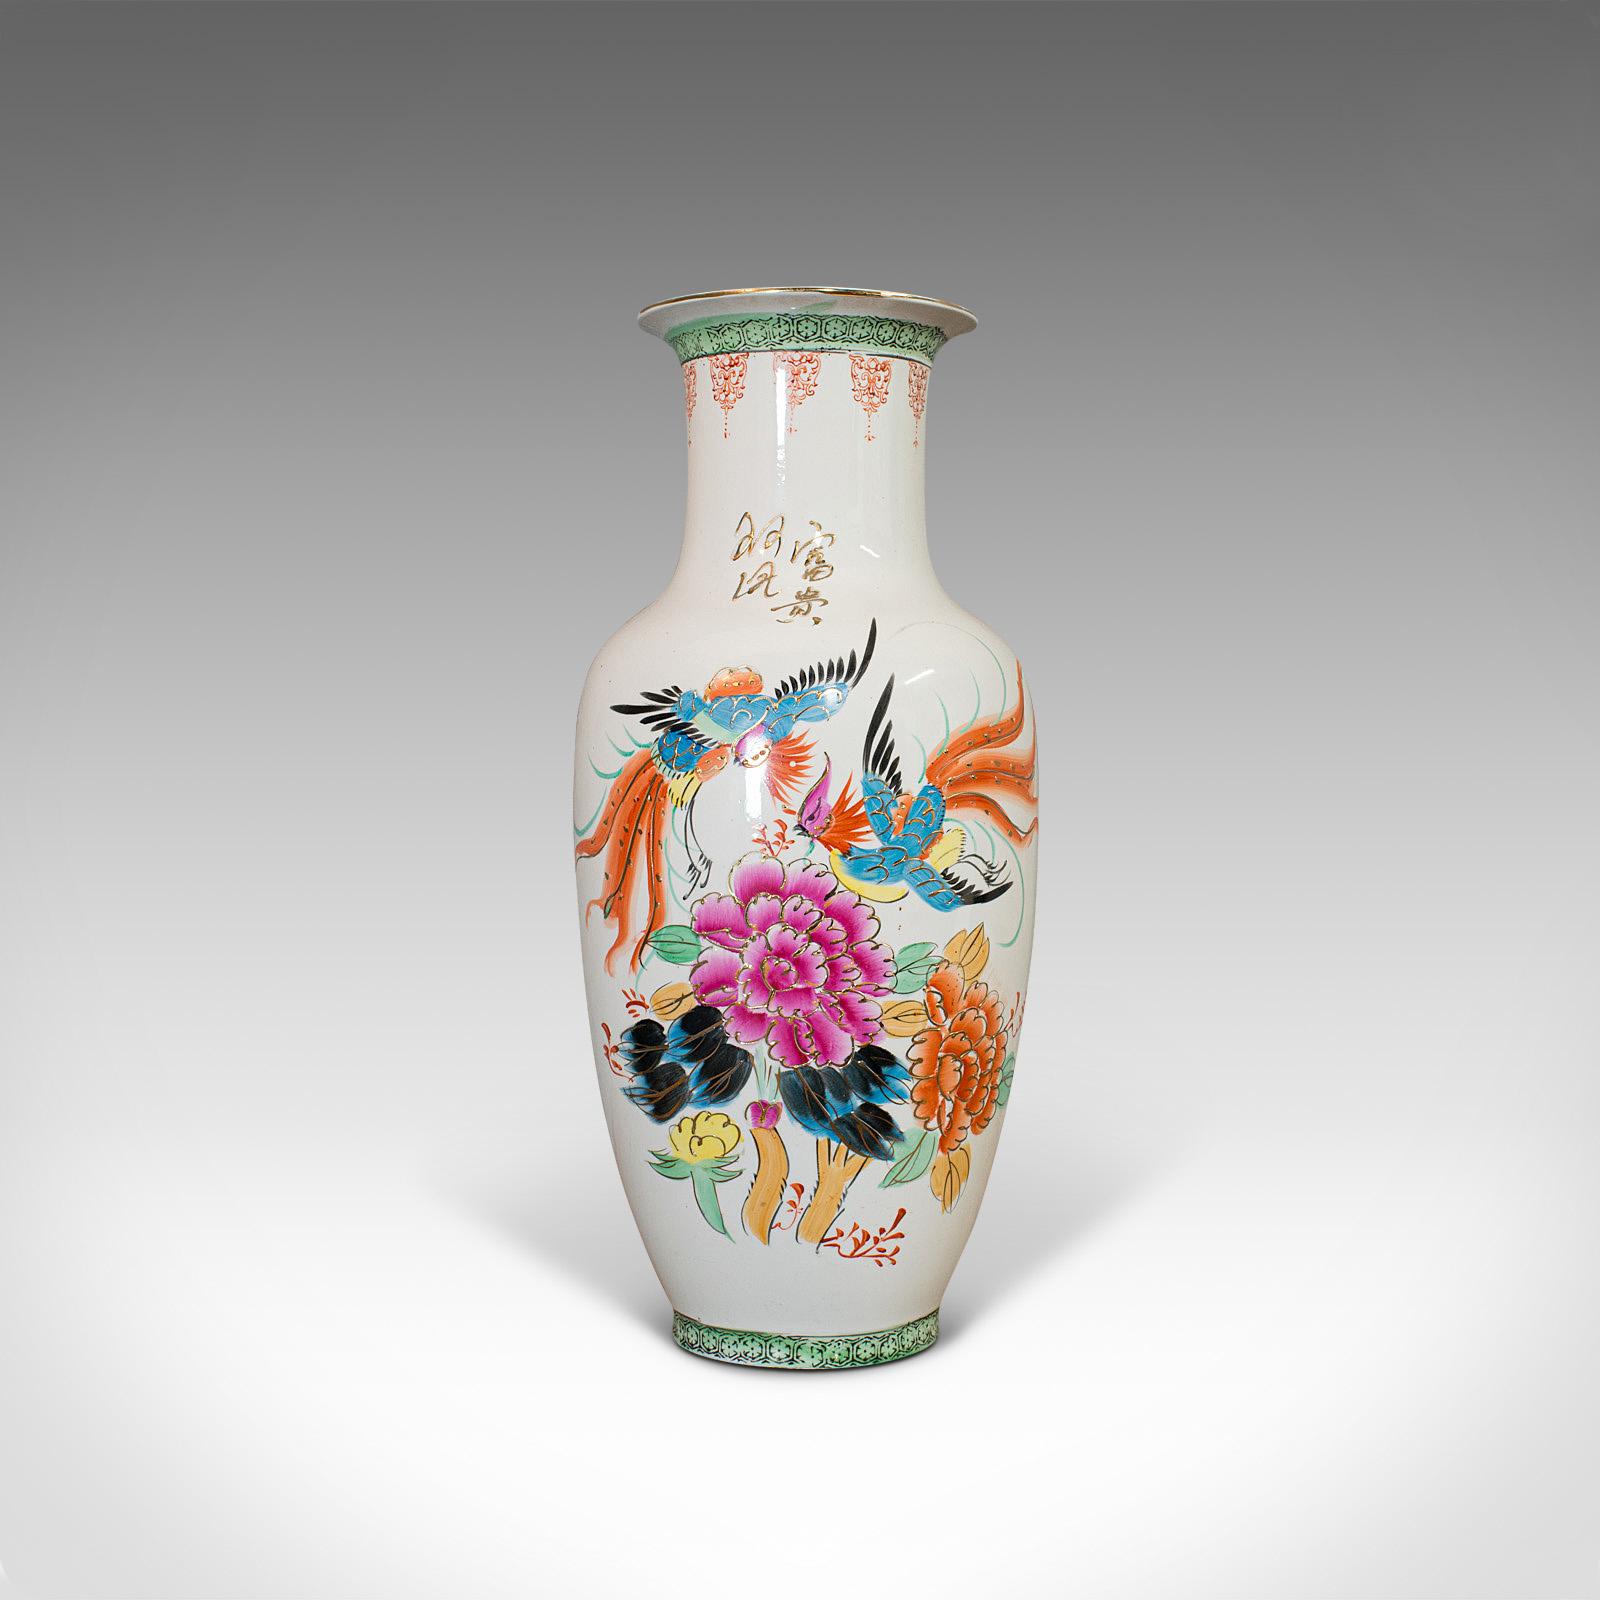 This is a vintage flower vase. An Oriental, ceramic baluster urn in Art Deco taste with bird of paradise motif, dating to the mid-20th century, circa 1940.

Superb color to this decorative vase
Displays a desirable aged patina
Ceramic in good